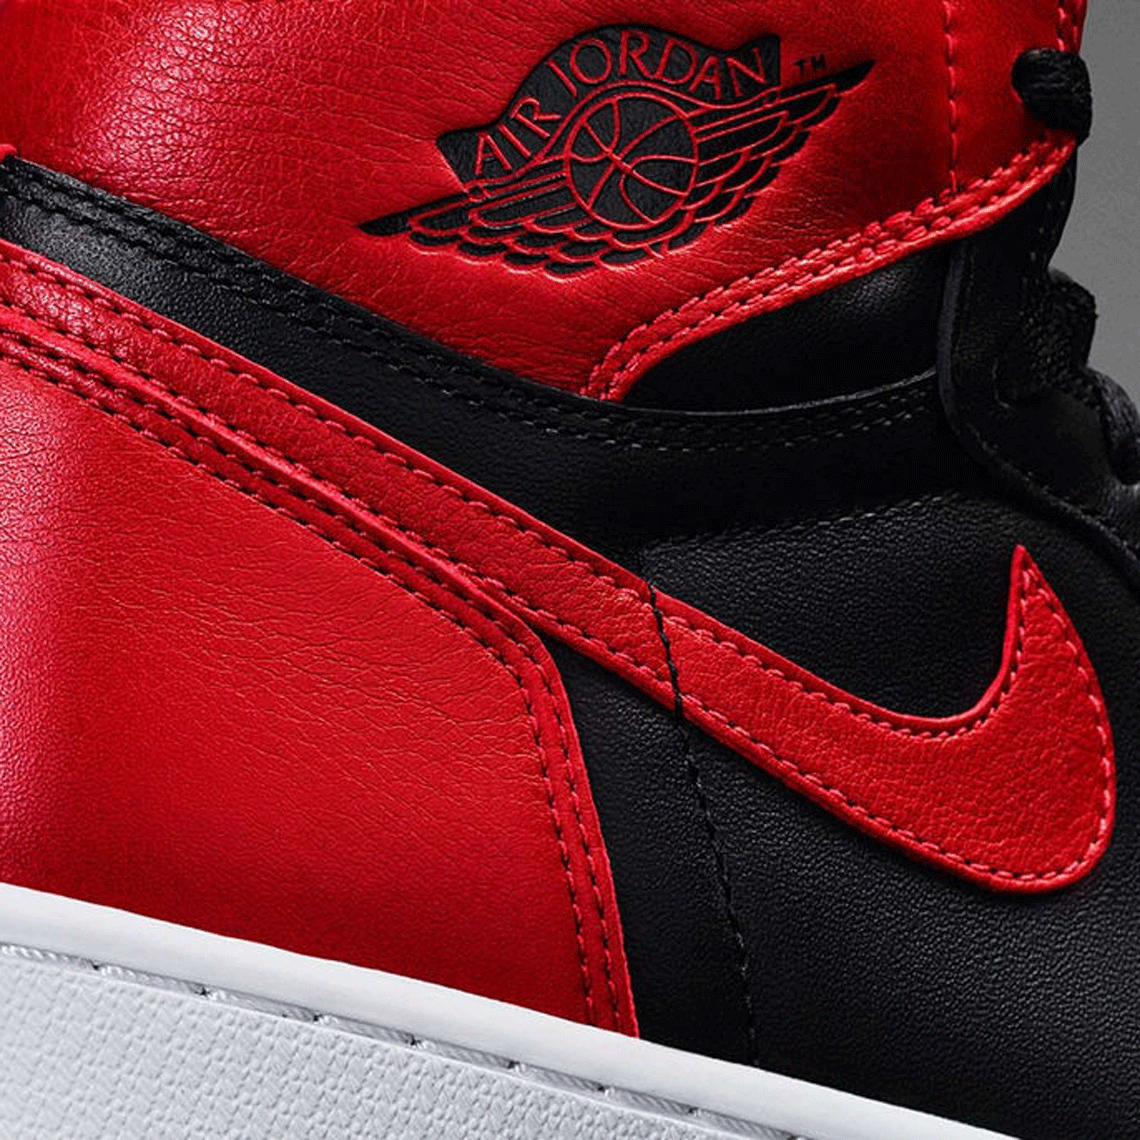 Why Are Jordan 1s So Expensive – A Breakdown